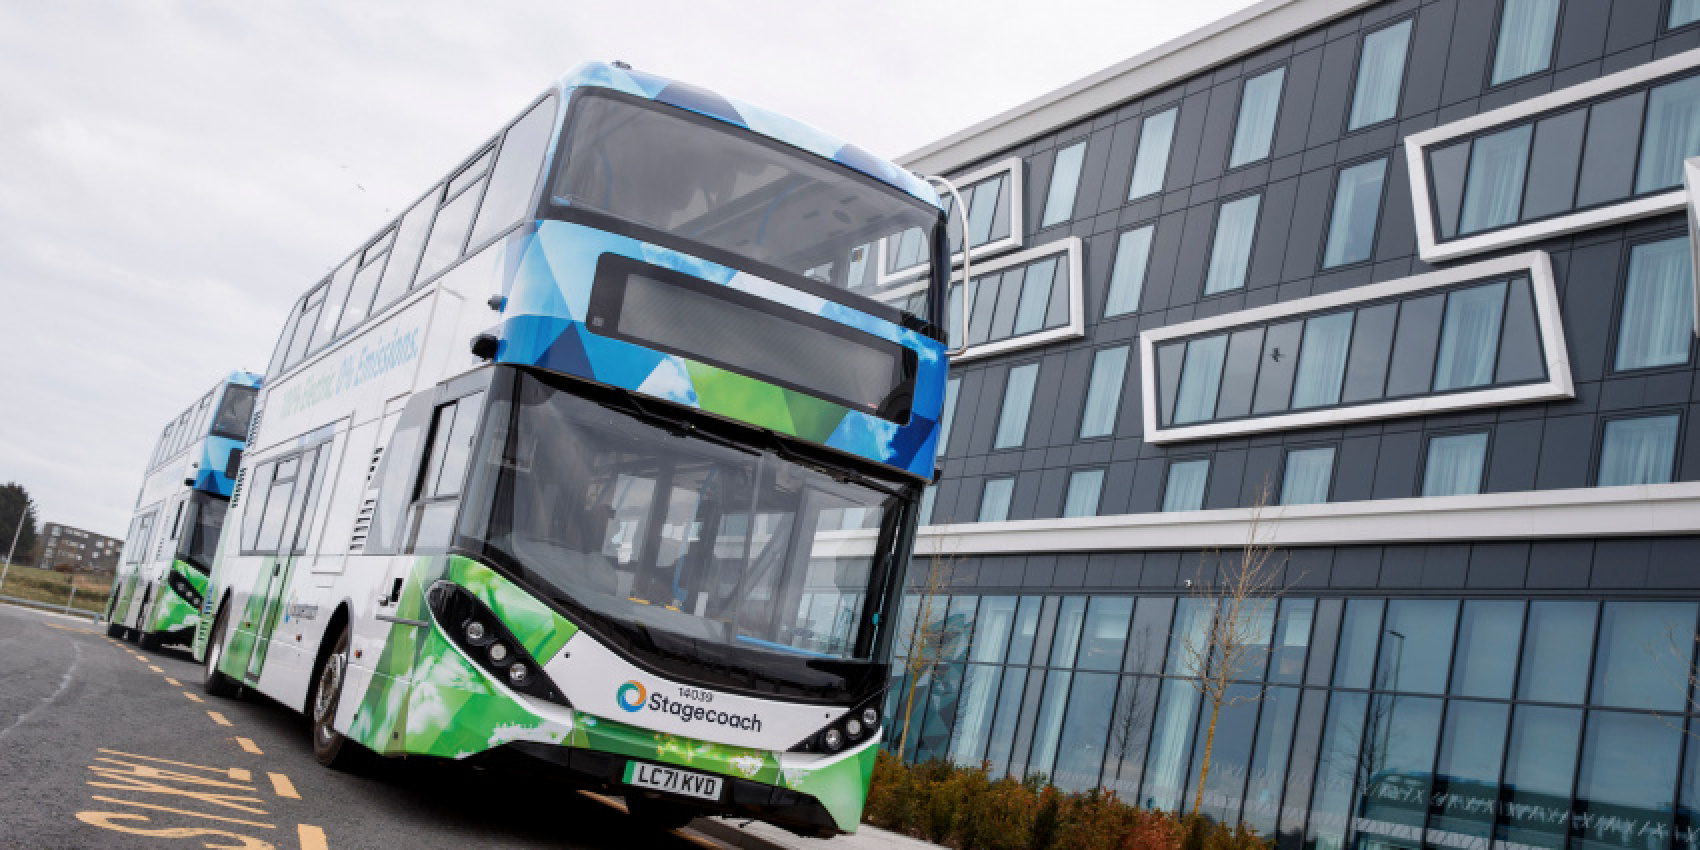 autos, cars, electric vehicle, fleets, aberdeen, byd-adl, electric buses, electric double-decker buses, public transport, scotland, stagecoach, stagecoach bluebird, aberdeen receives 22 electric double-deckers